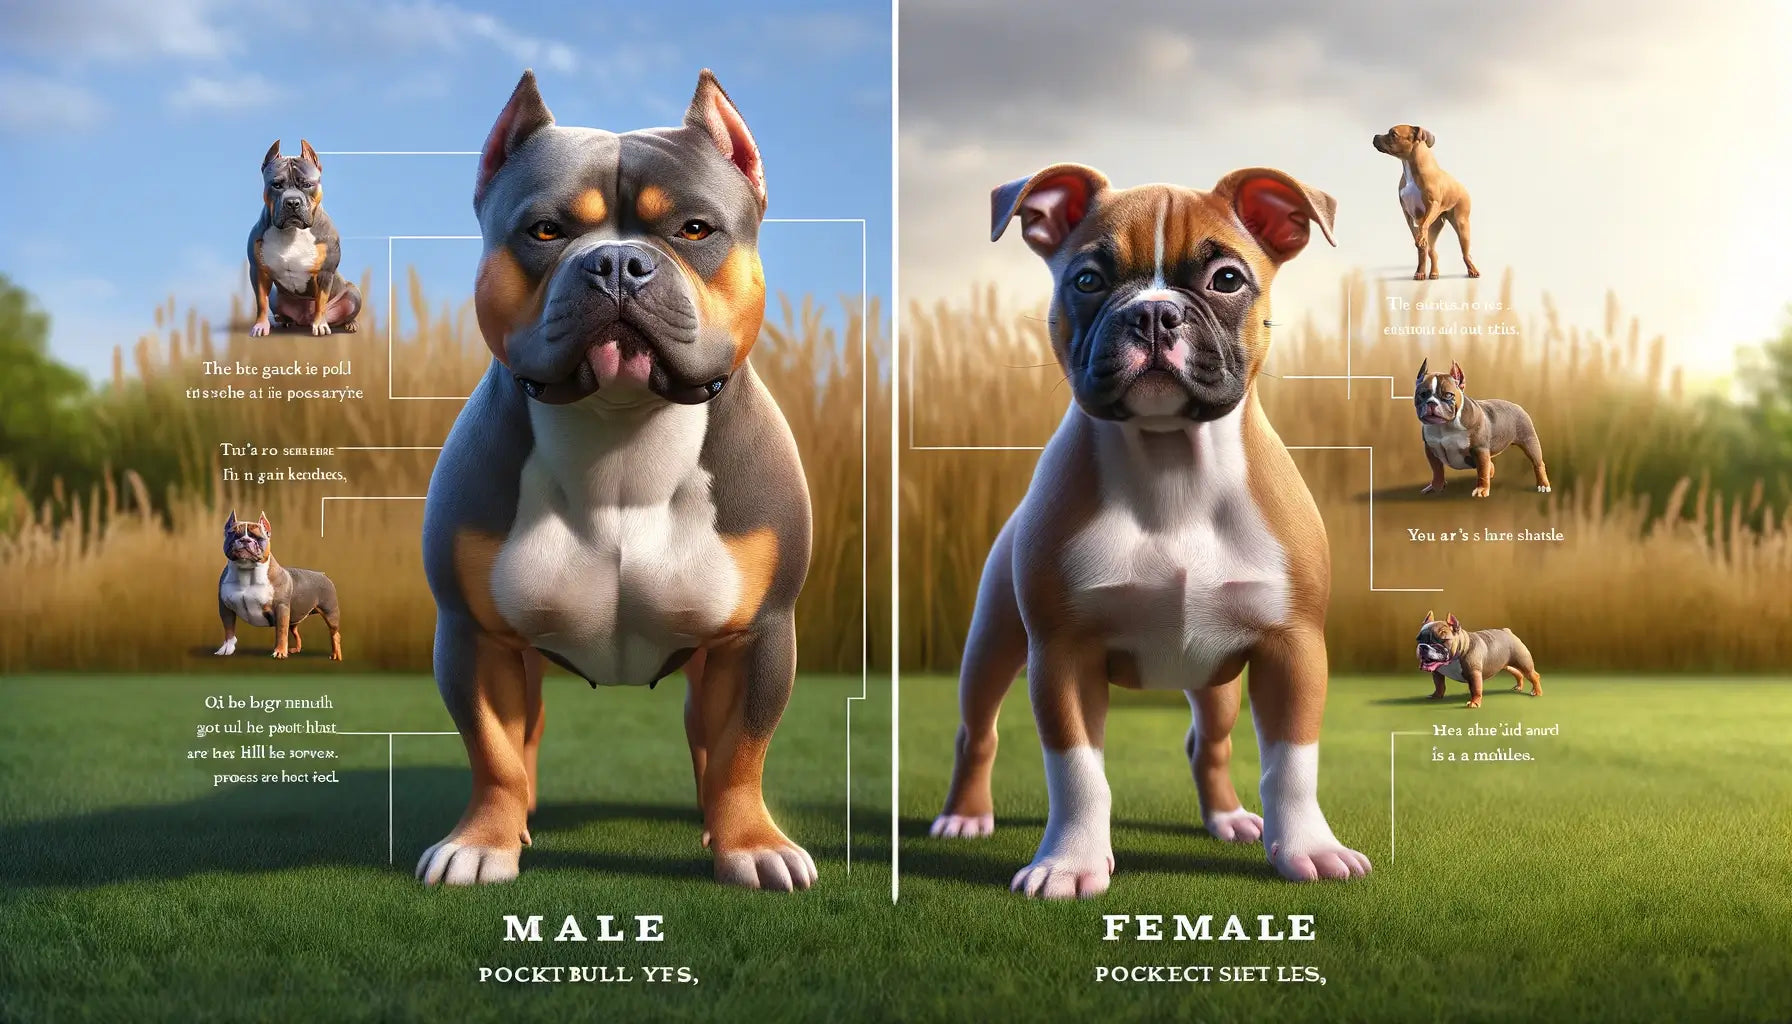 An informative split image that on one side shows a male Pocket Bully characterized by a more muscular build.